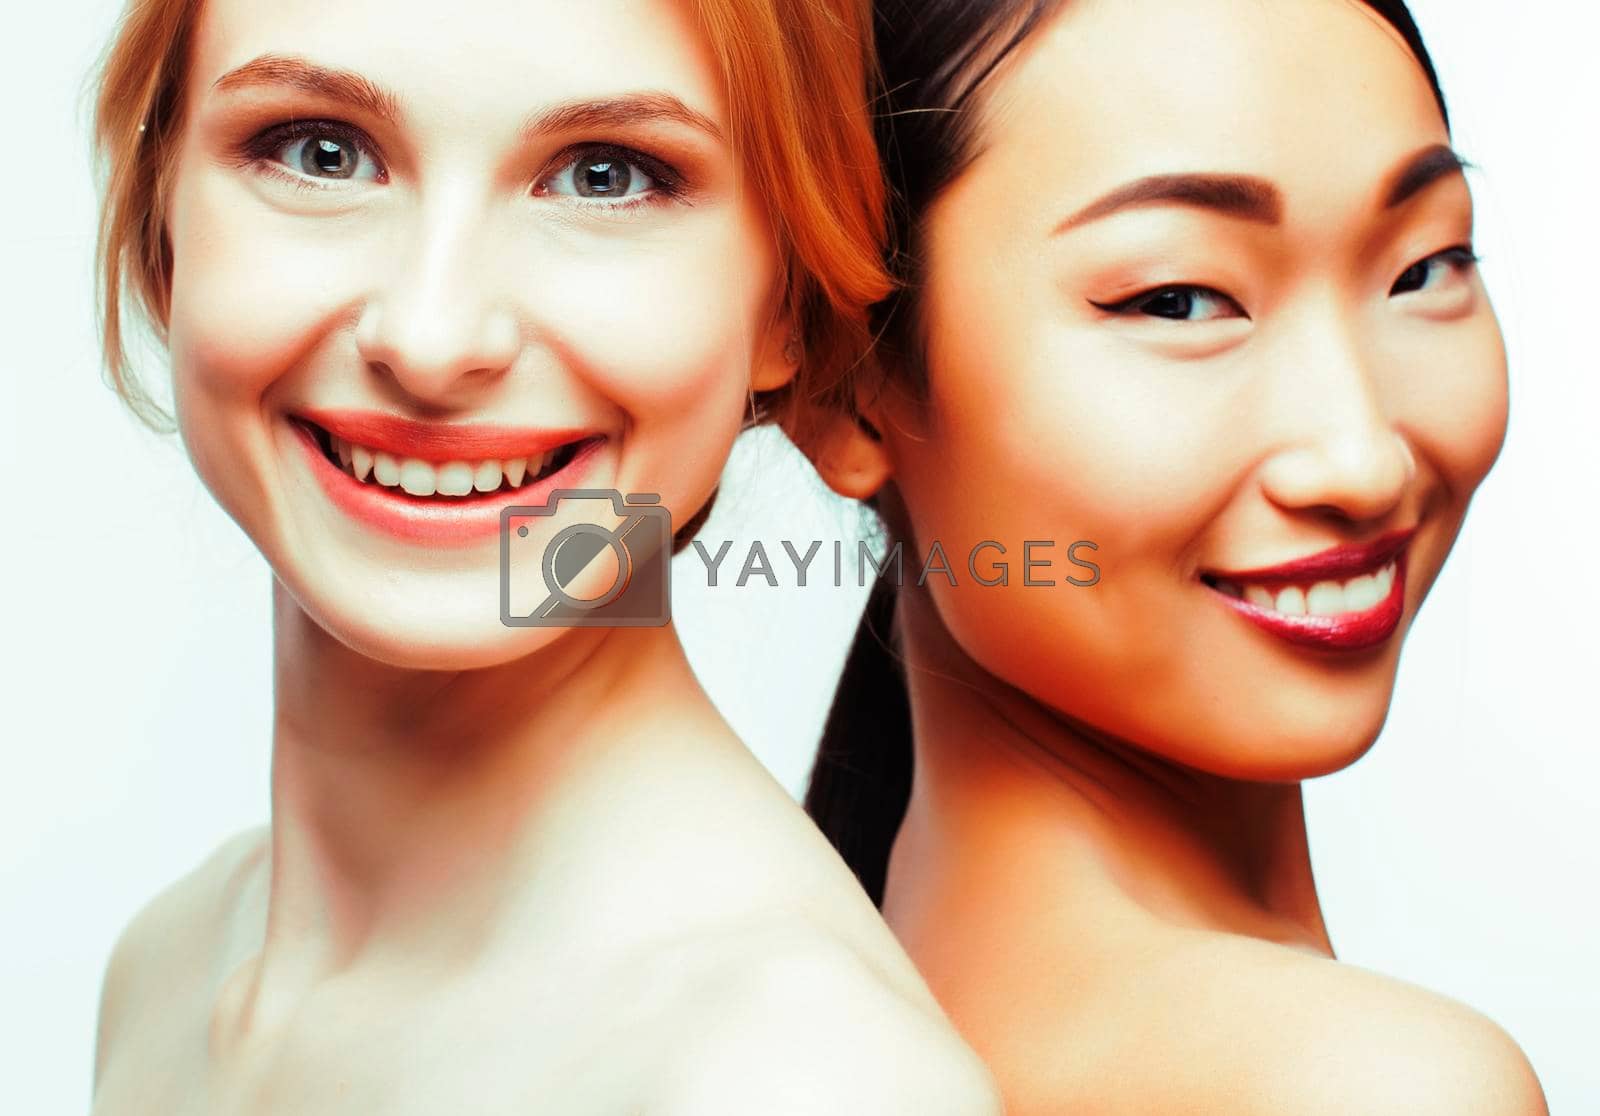 Royalty free image of different nation woman: caucasian and asian together isolated on white background happy smiling, diverse type on skin, lifestyle people concept by JordanJ